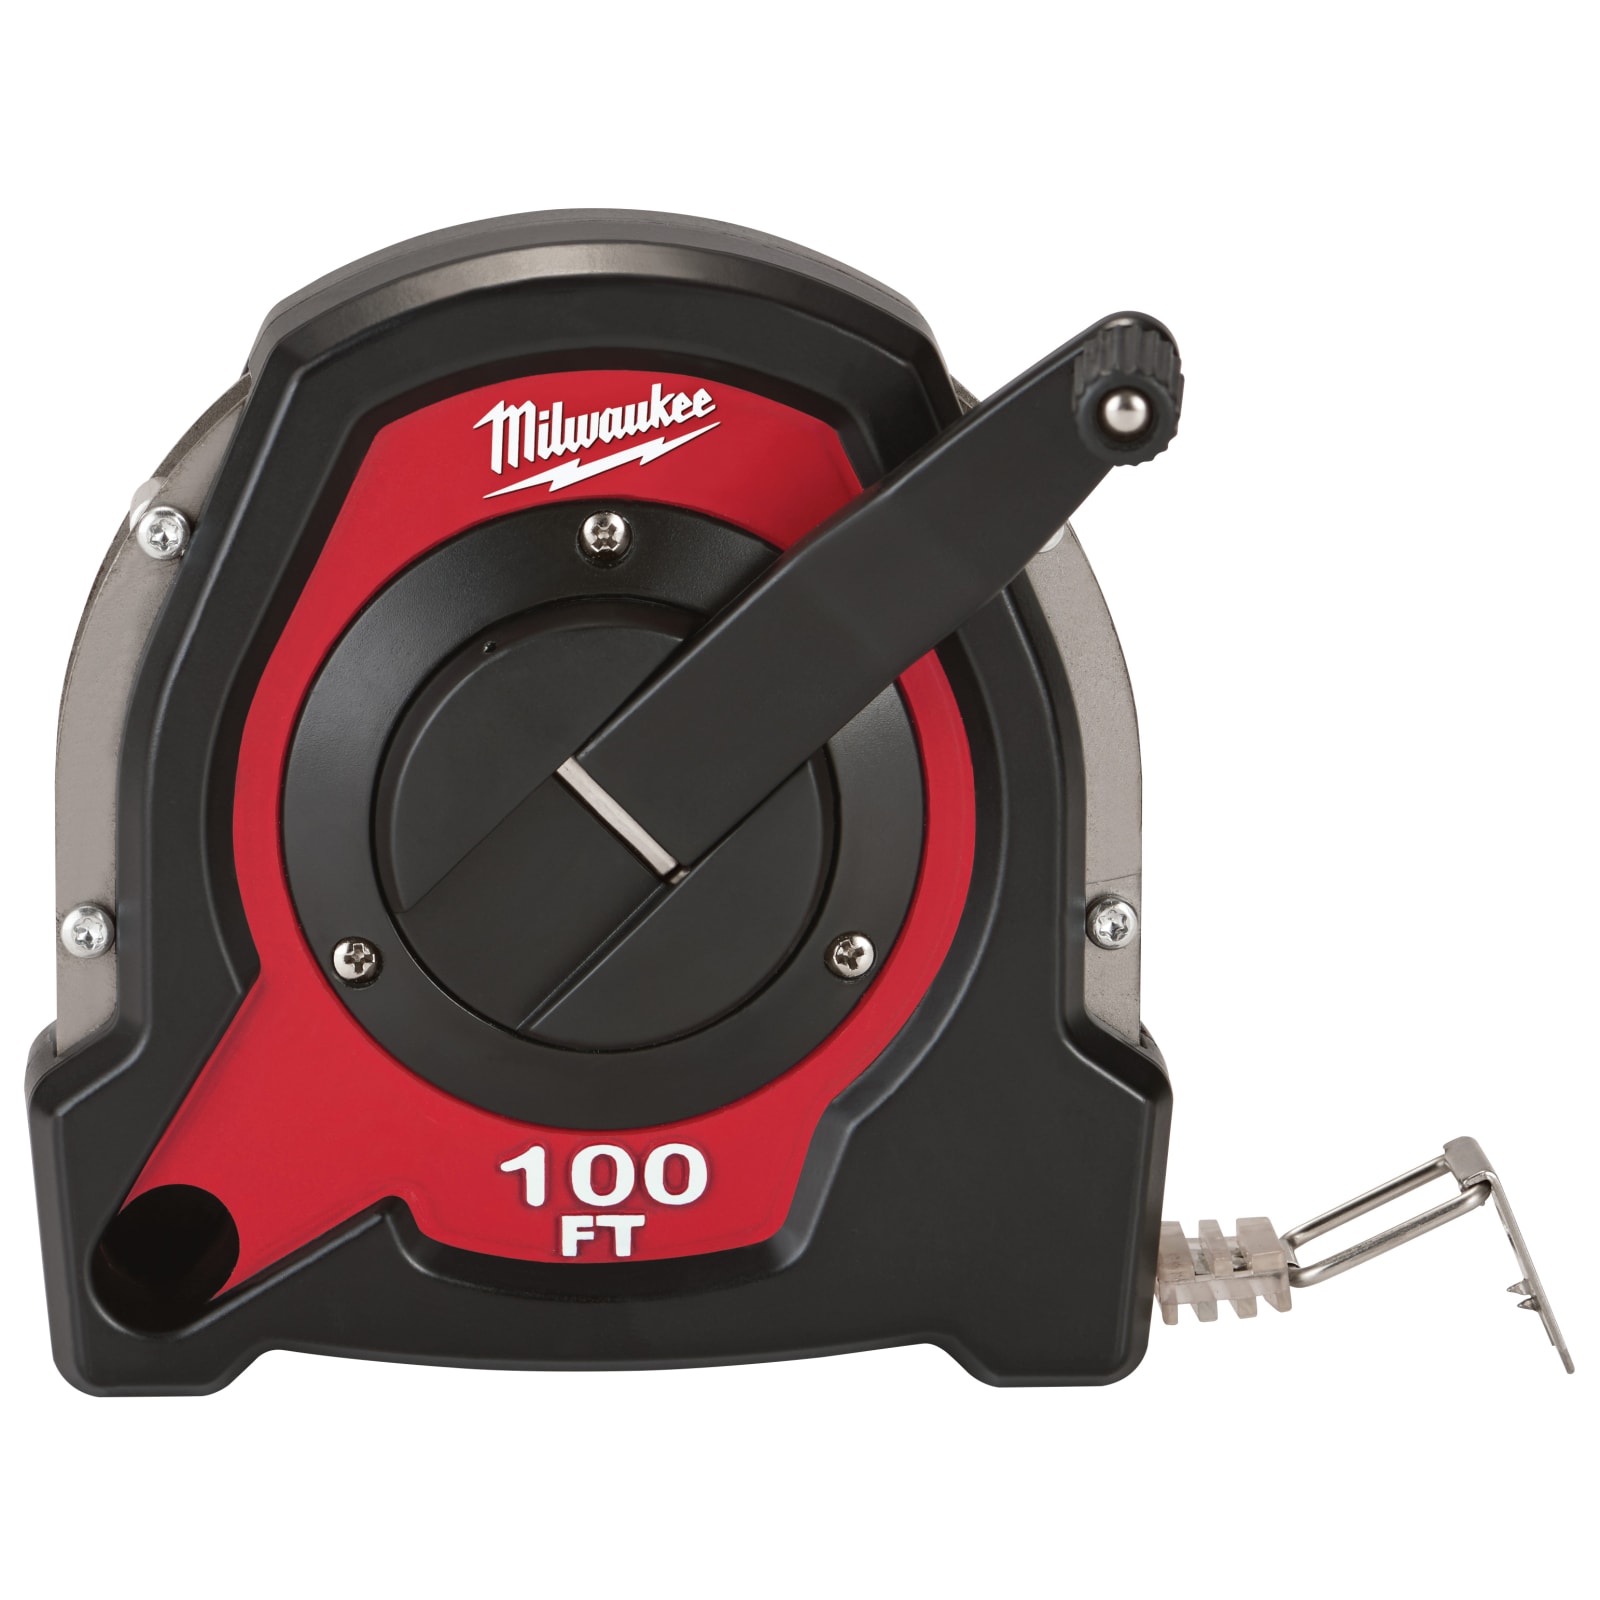 Toy Tape Measure by Tool Tech at Fleet Farm